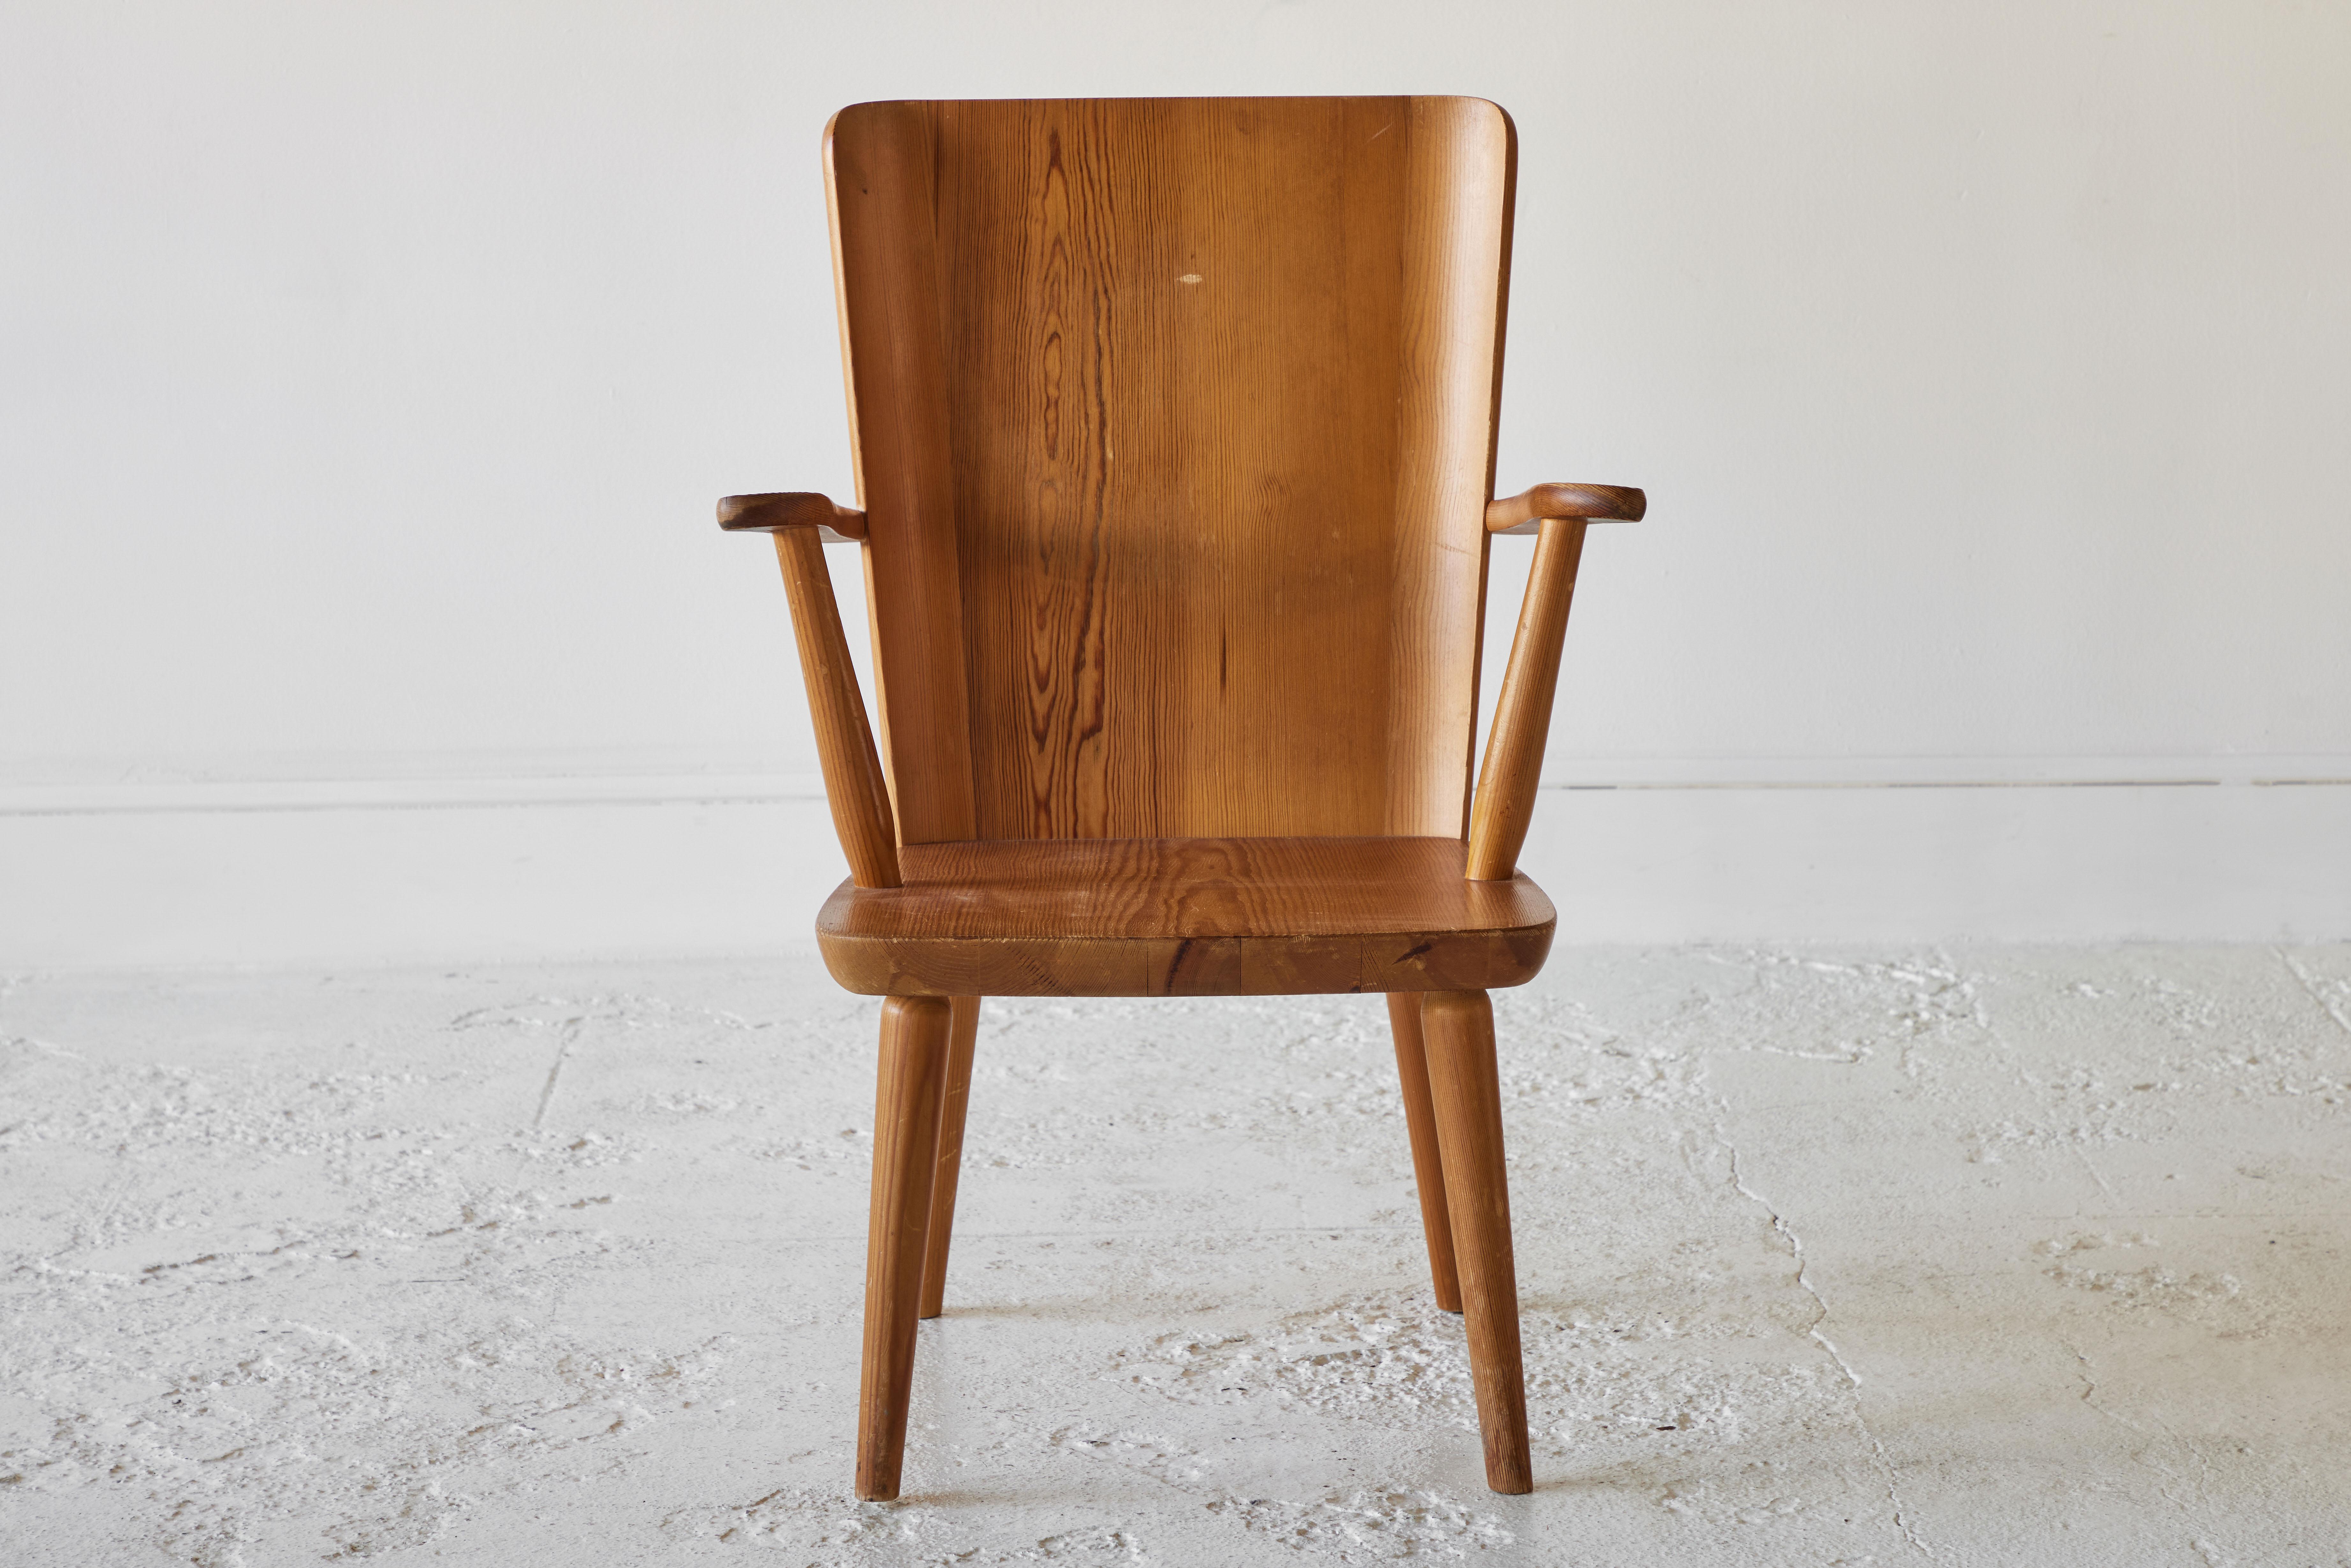 Pair of Pine Chairs by Goran Malmvall for Karl Andersson & Söner, Sweden 1